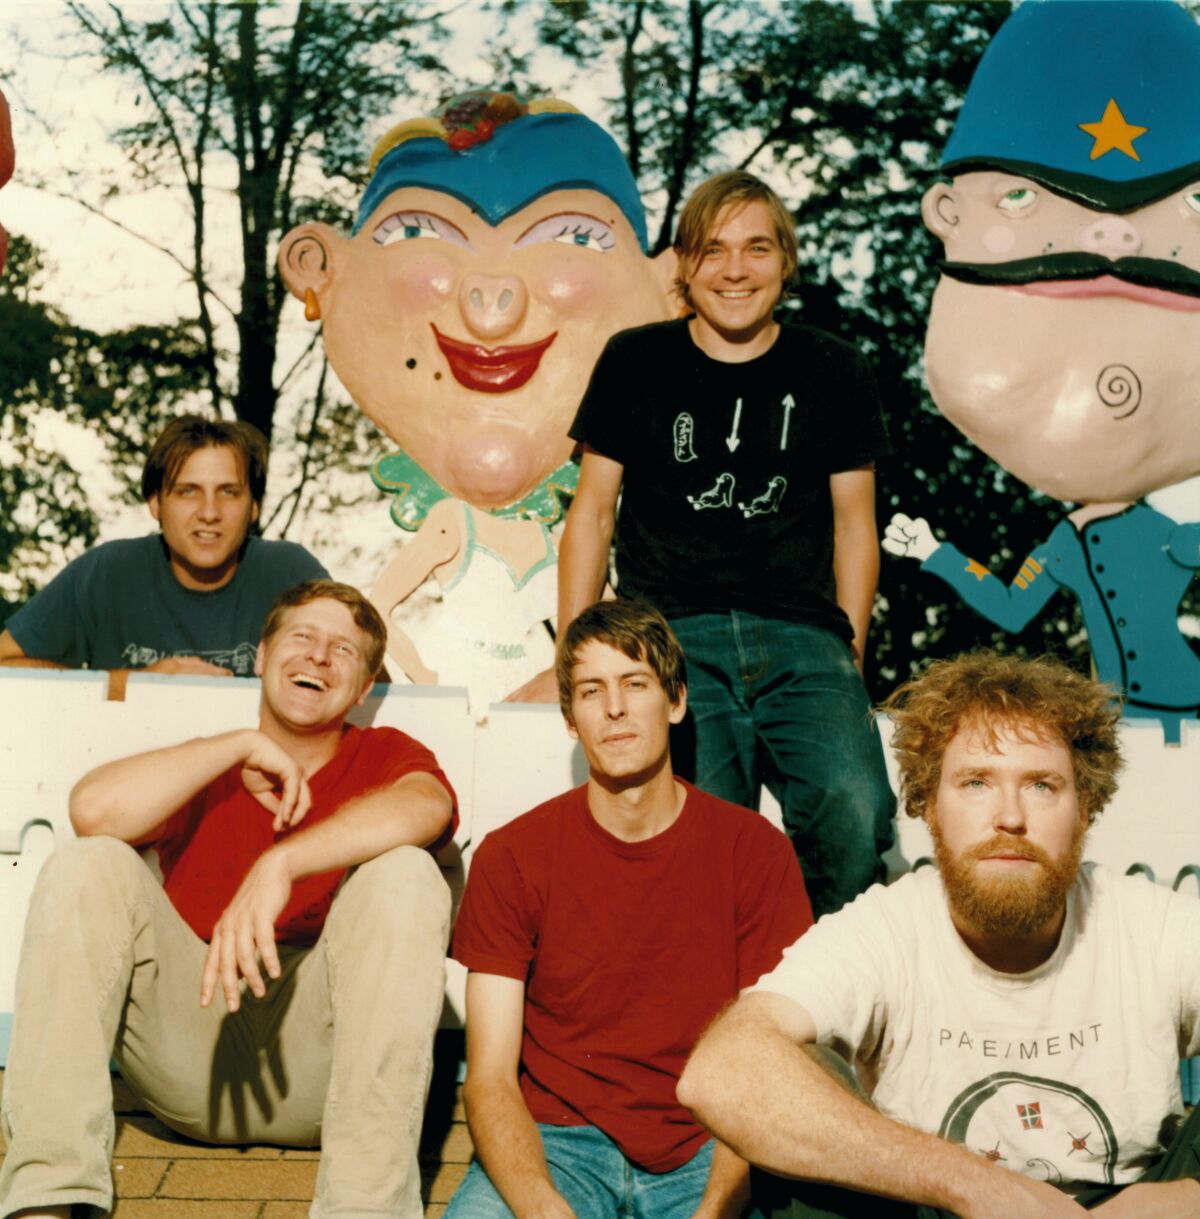 Pavement in 1998